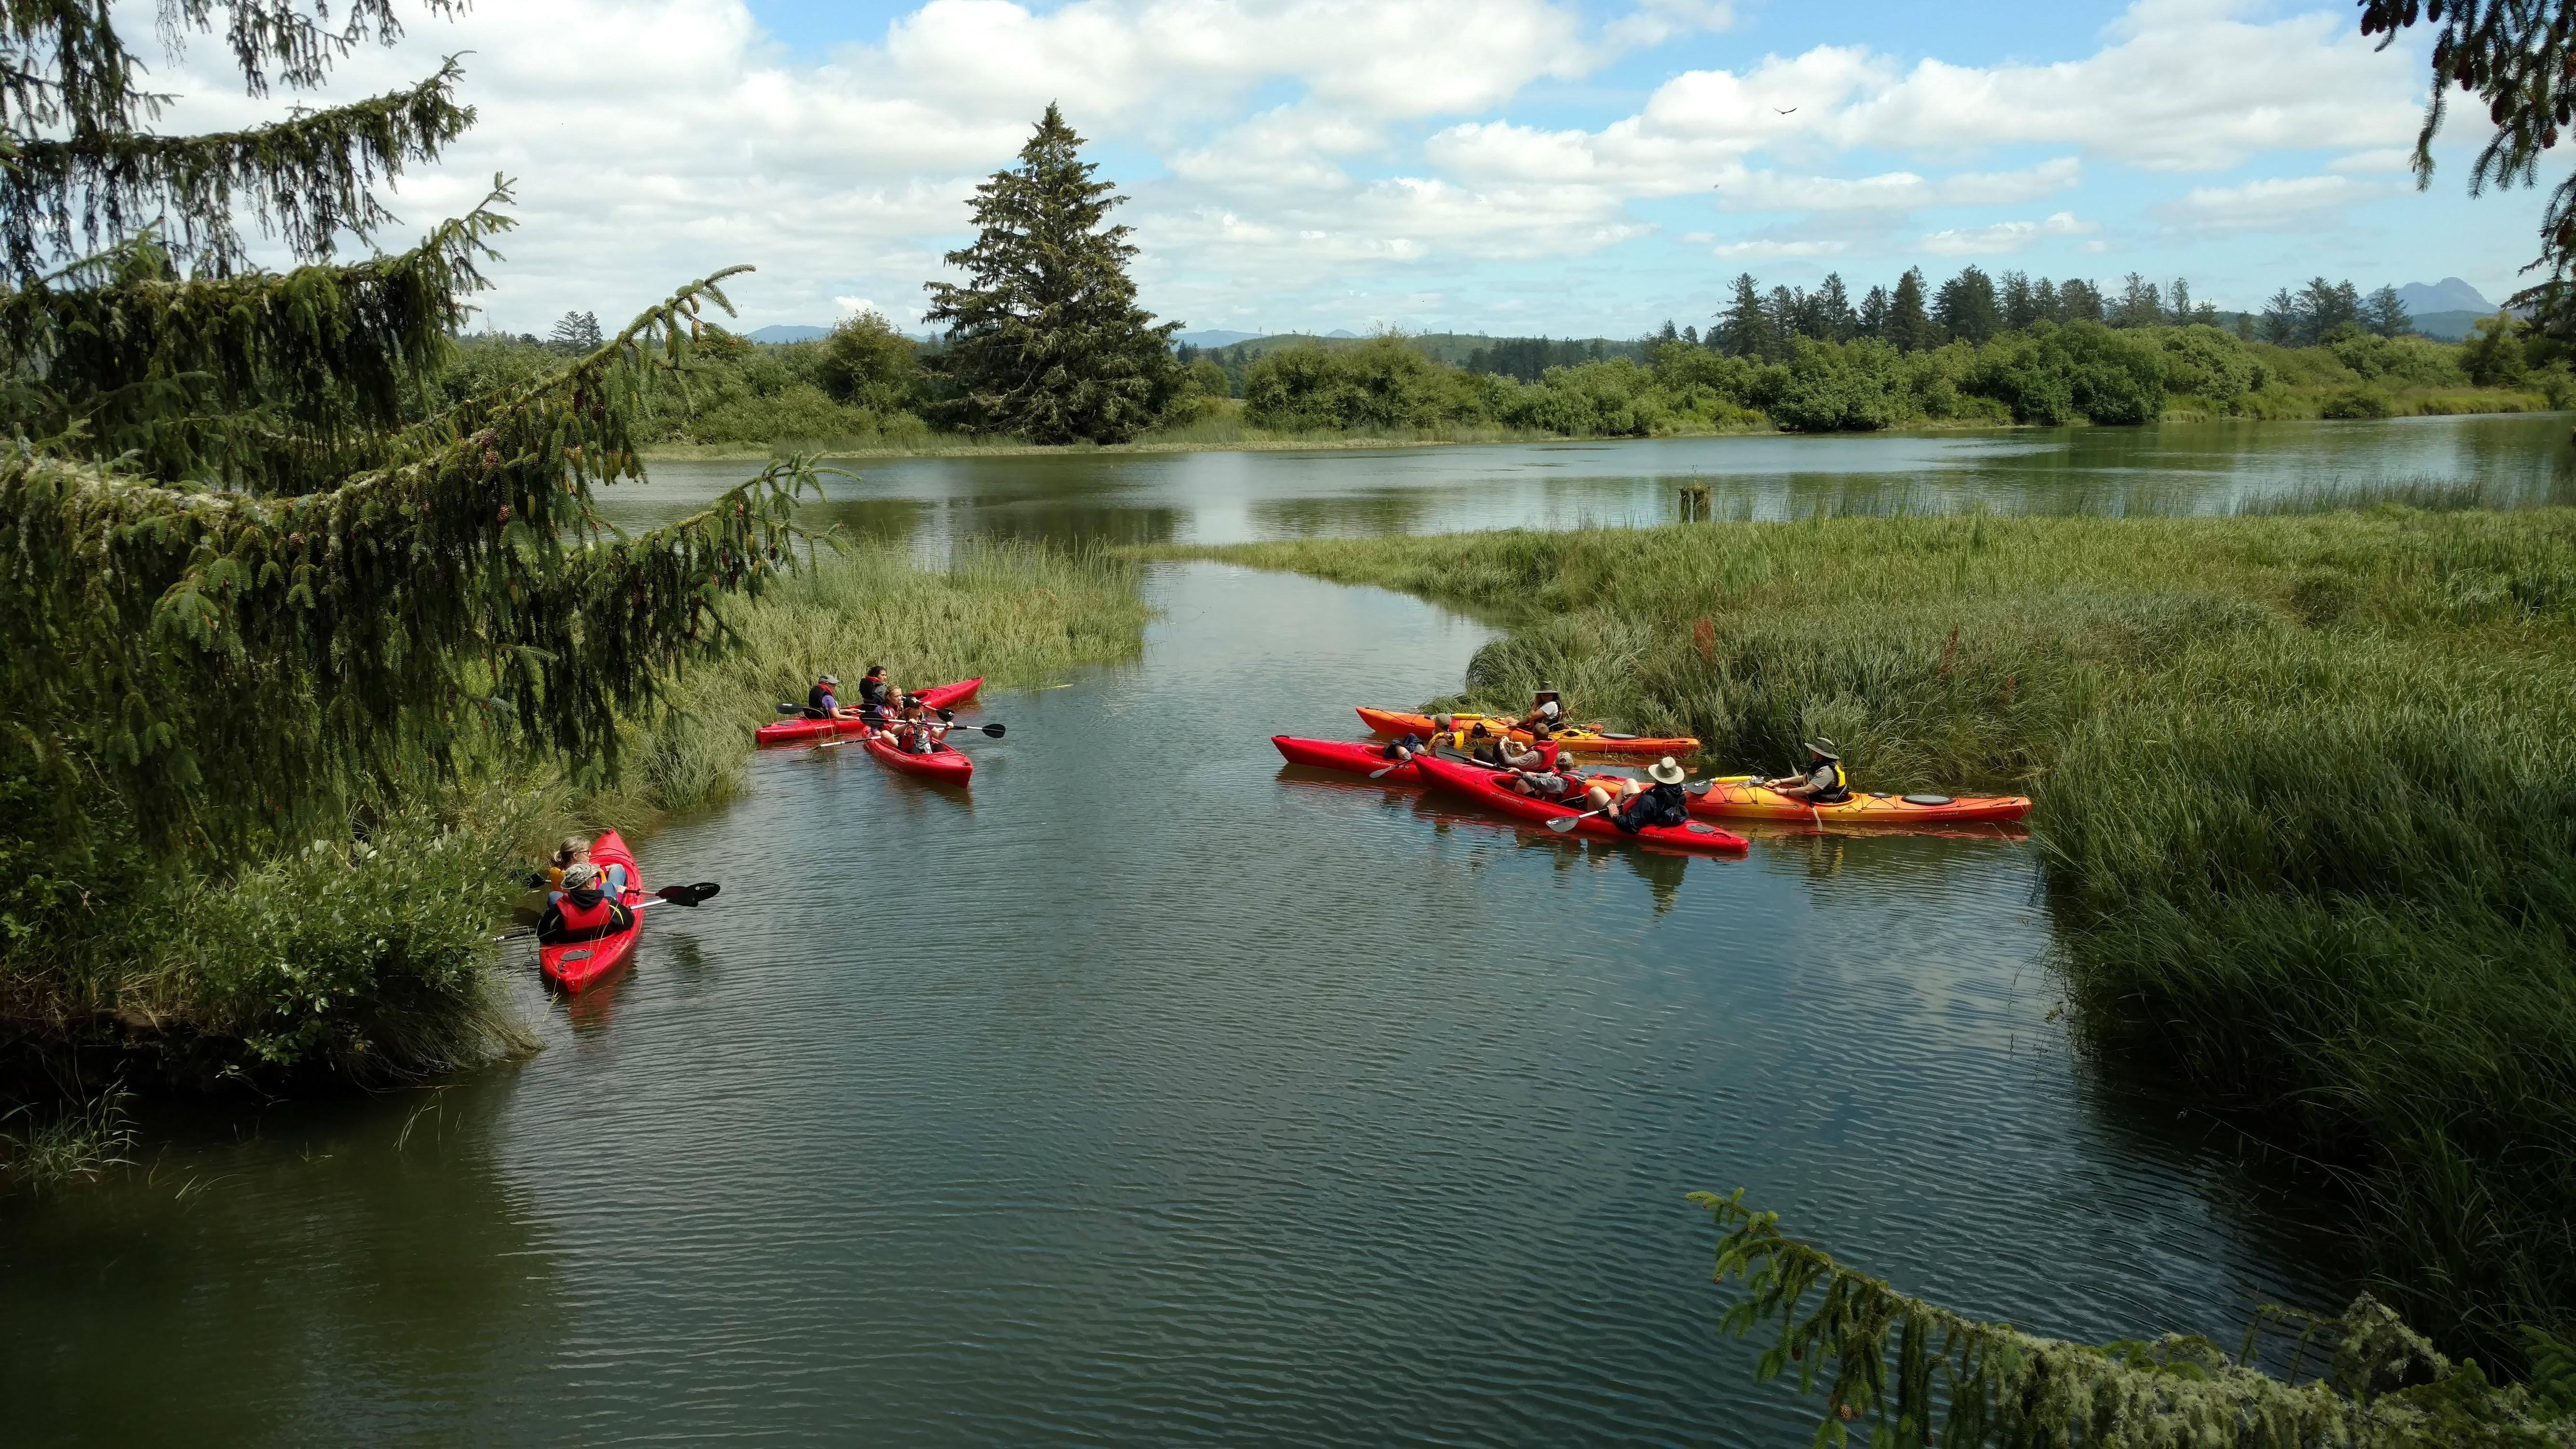 Paddlers in warm-colored kayaks cluster along the grassy banks of a river's side channel.